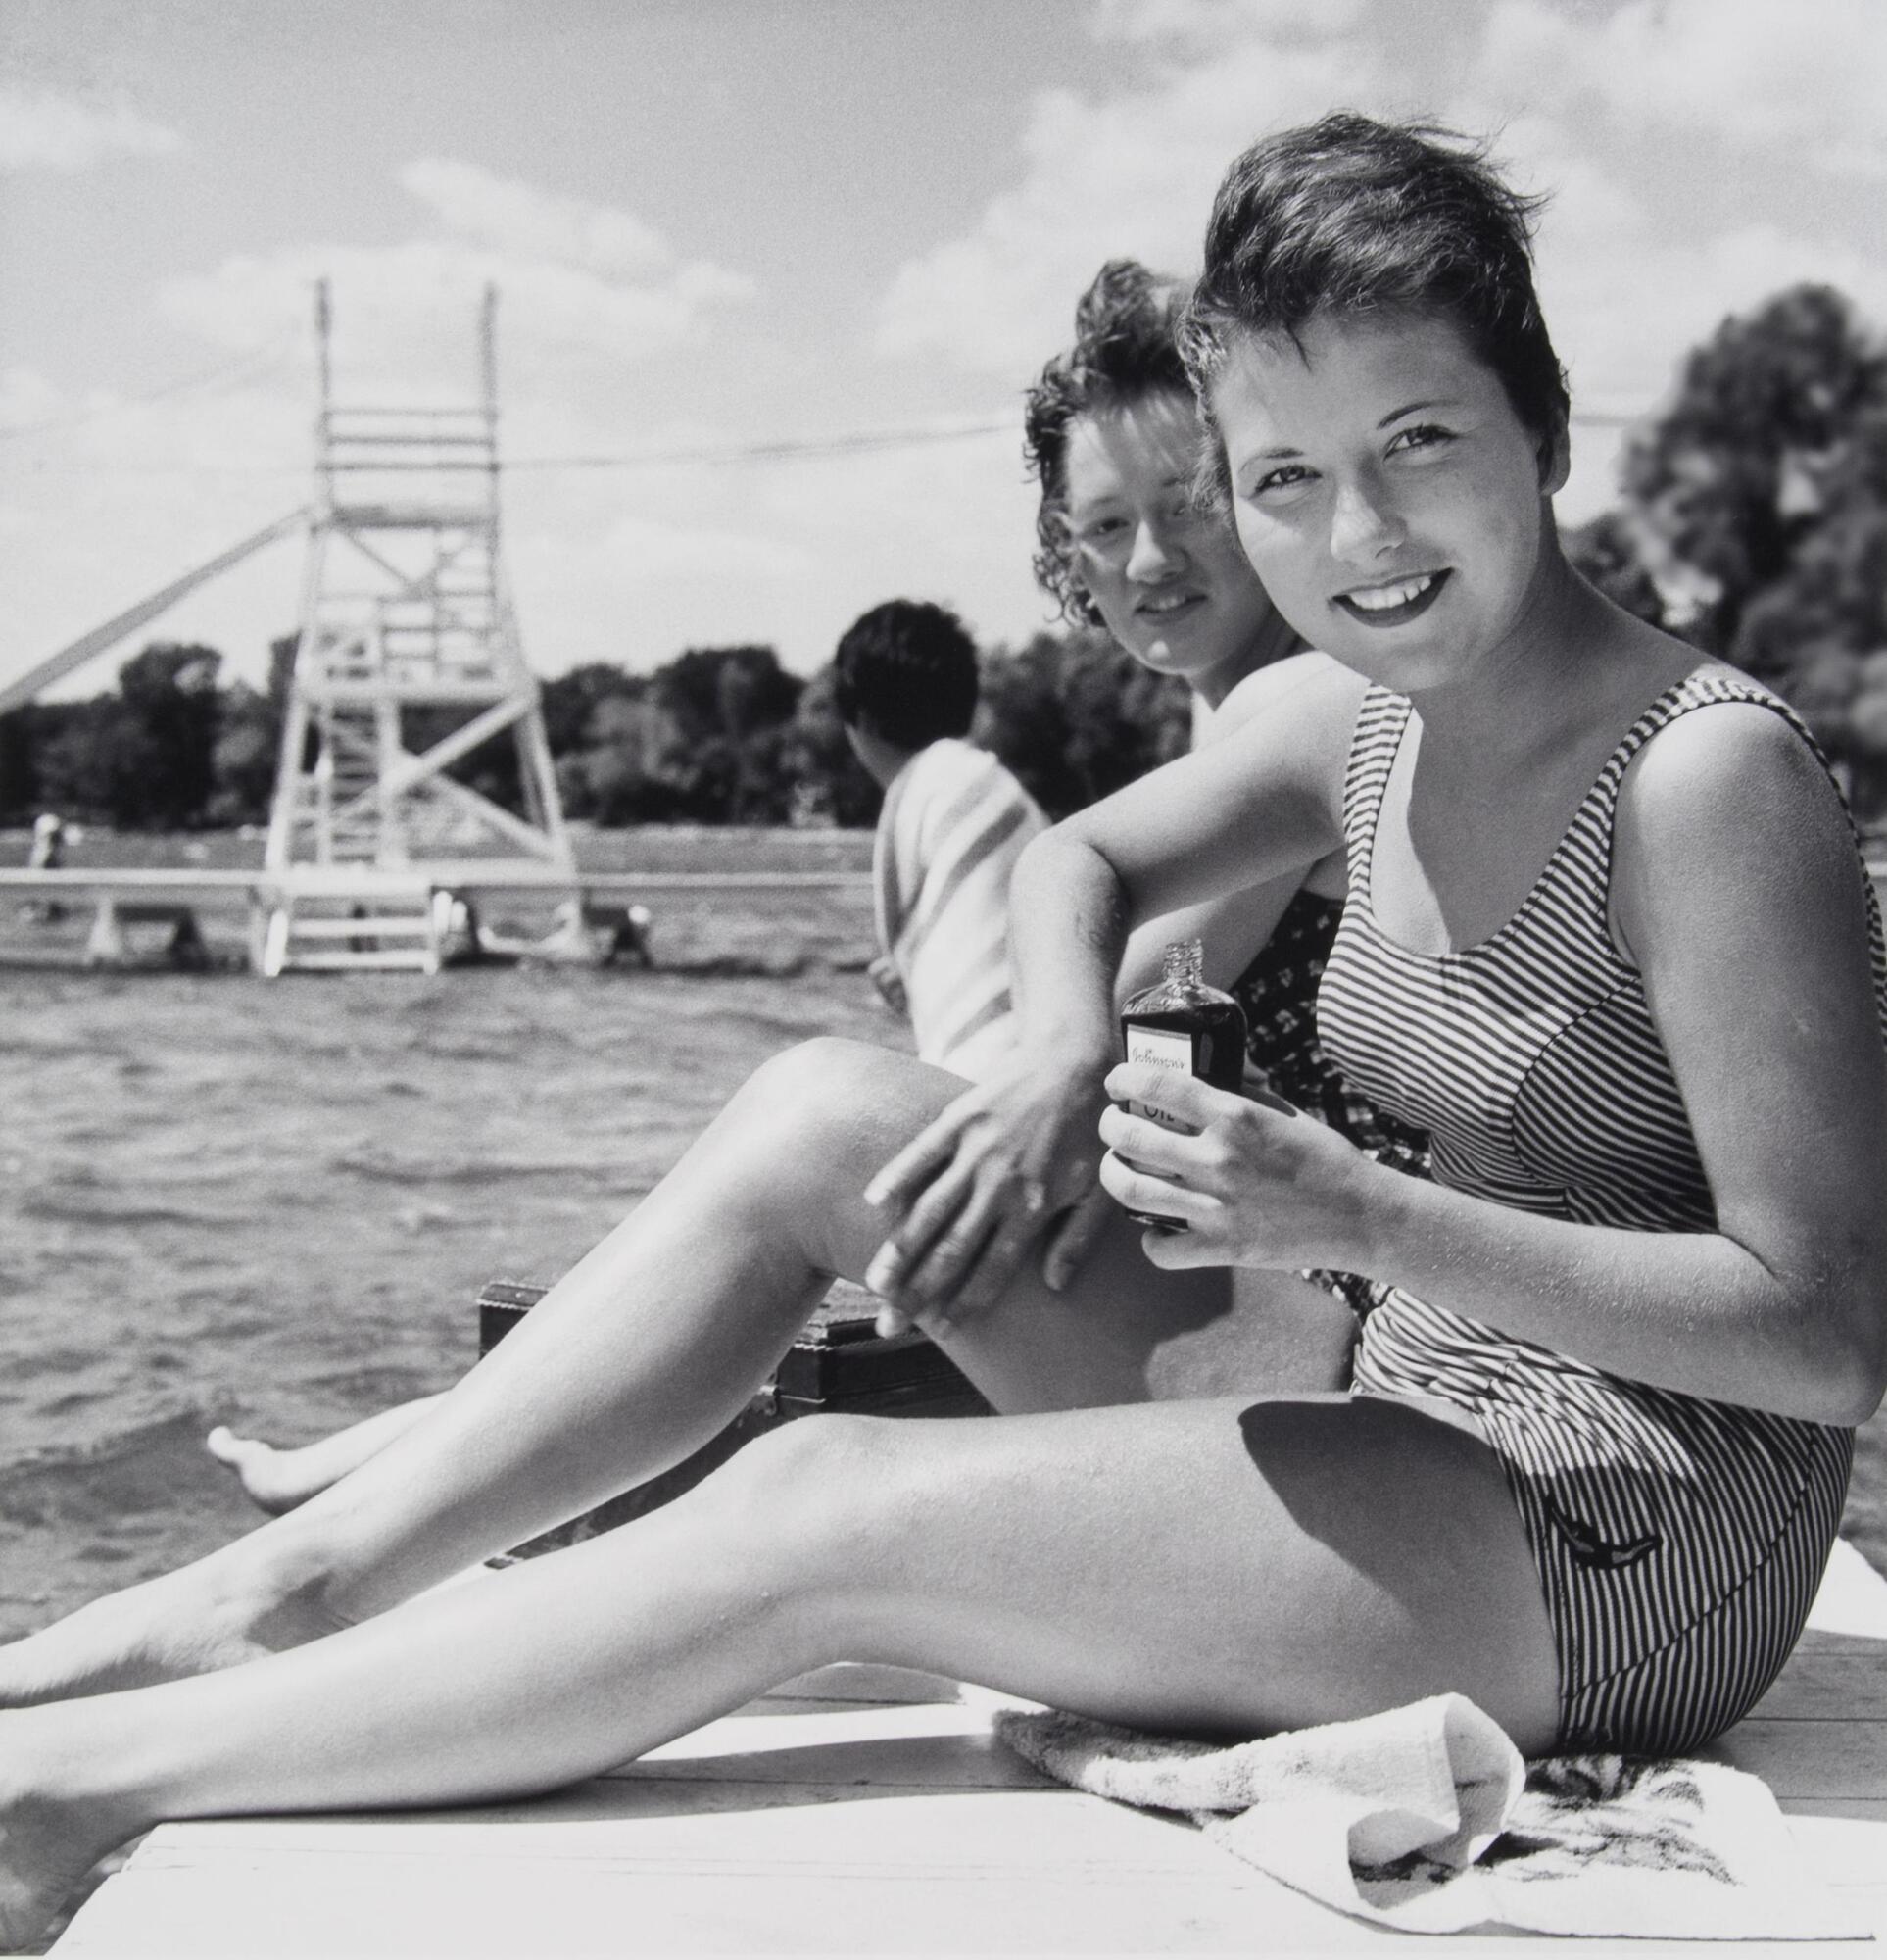 Two women seated on dock in bathing suits, looking at the camera. The woman in the front is holding a small clear bottle.